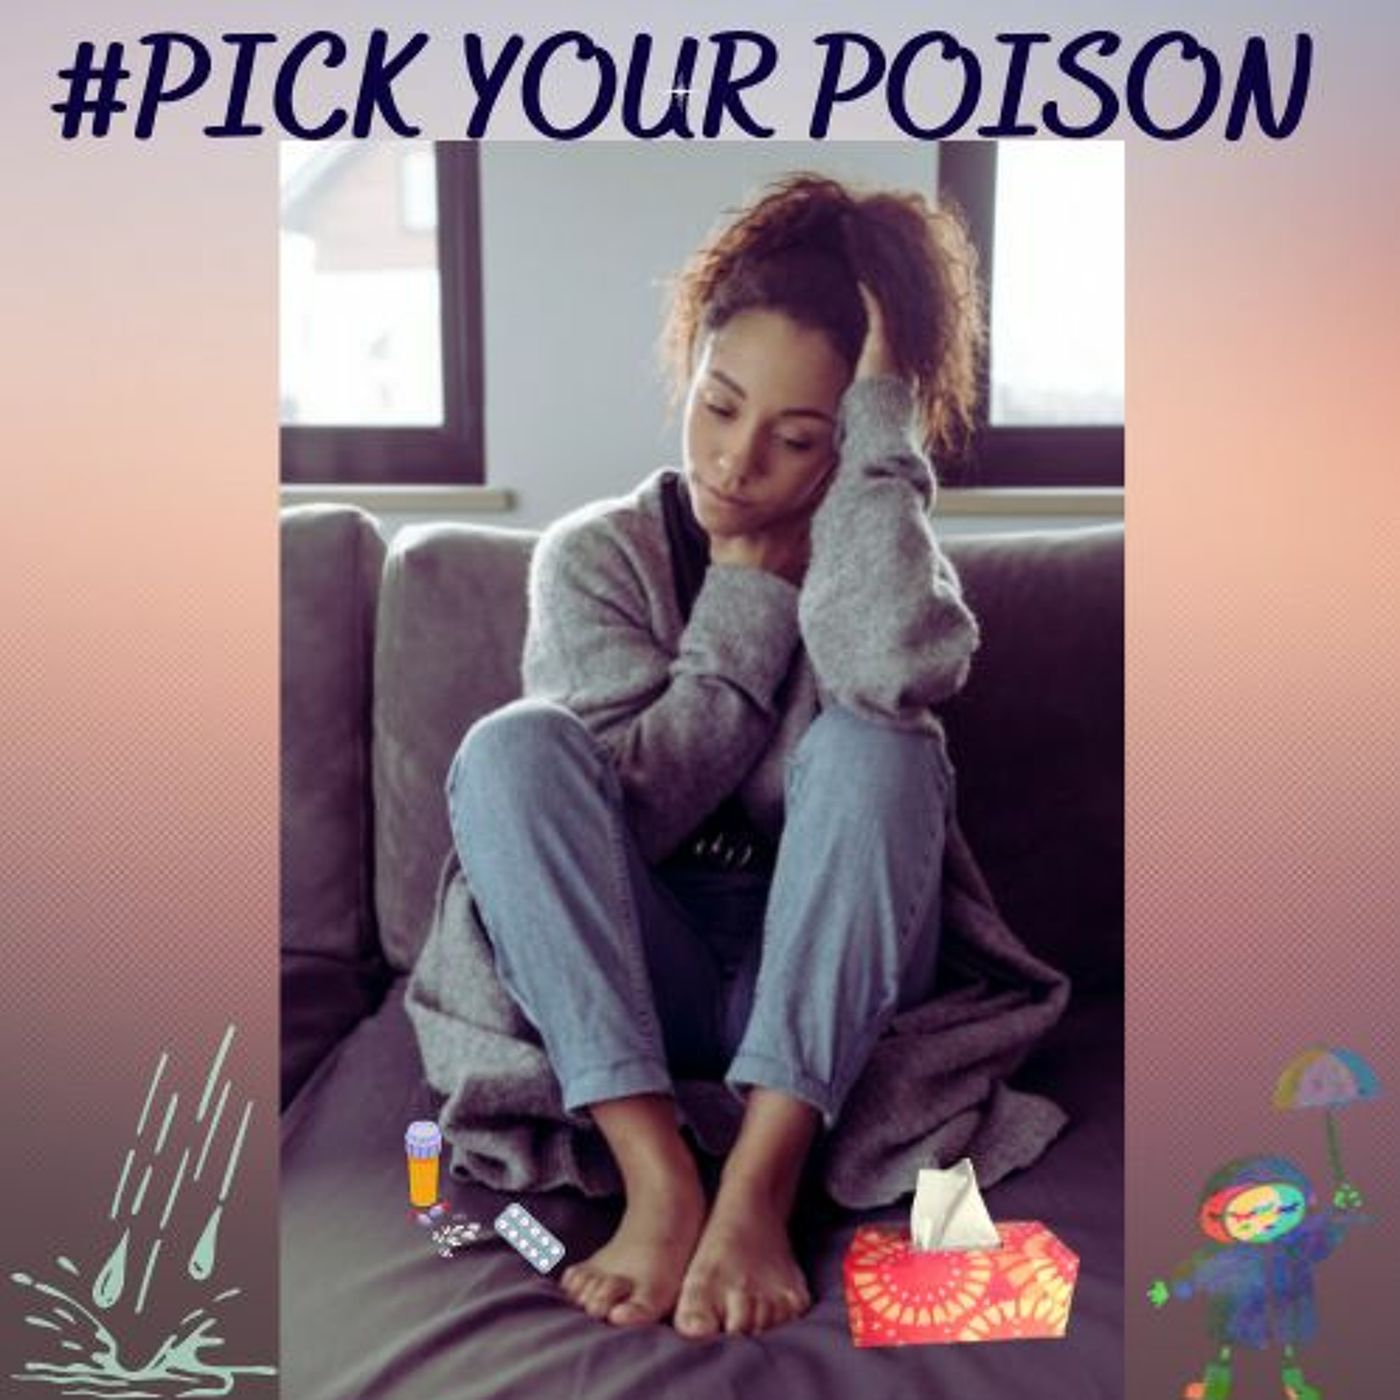 #PICK YOUR POISON!